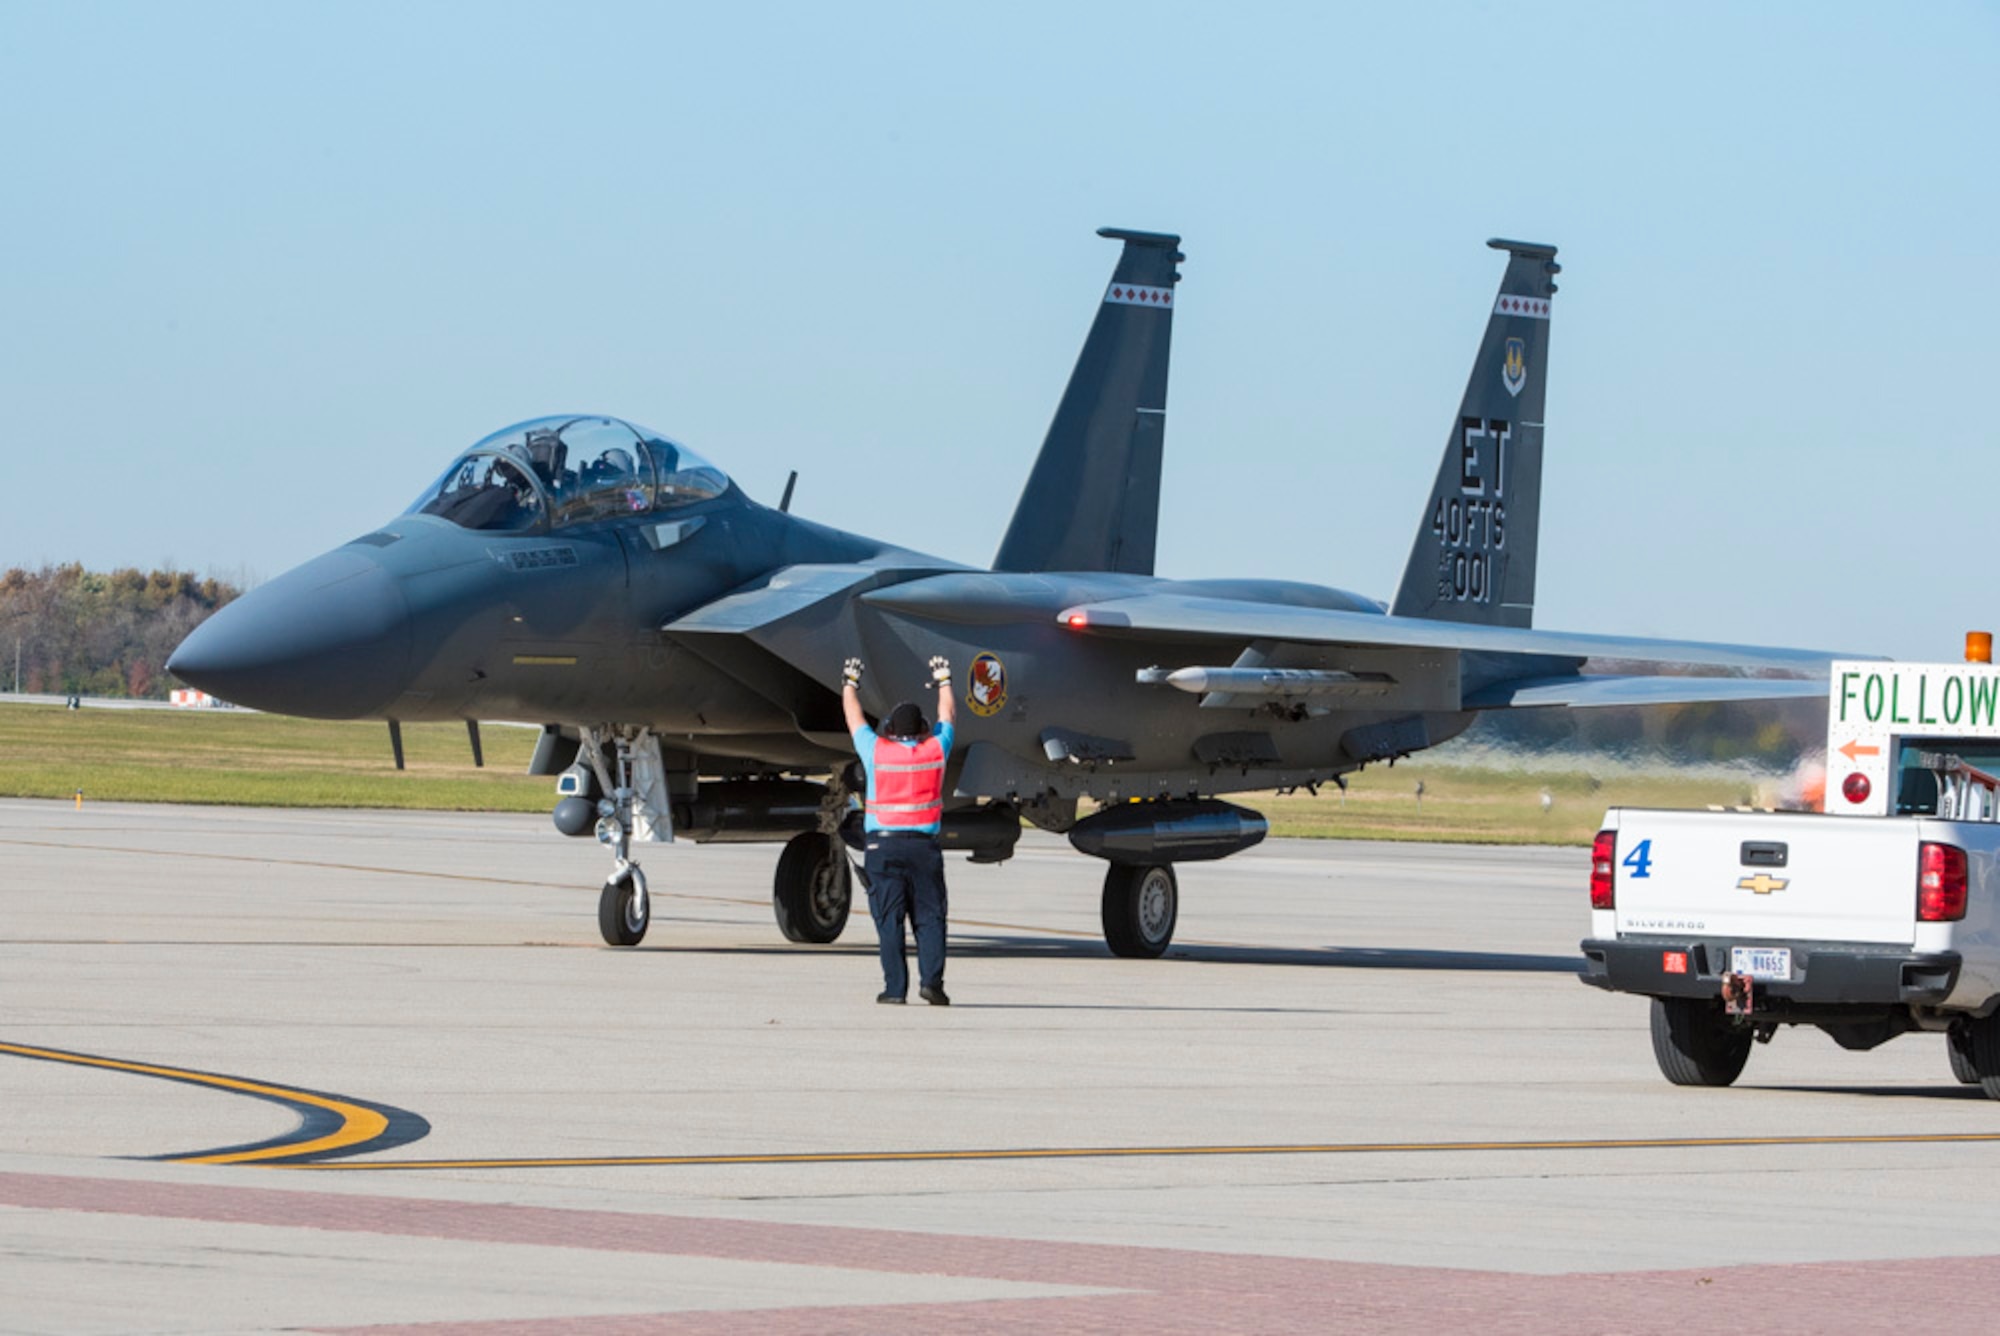 An F-15EX fighter jet taxis to its parking spot at Wright-Patterson Air Force Base, Ohio, Nov. 8, 2021. The jet visited Wright-Patt to give the Air Force Life Cycle Management Center’s F-15EX Program Team the opportunity to see the aircraft up close. (U.S. Air Force photo by Jaima Fogg)